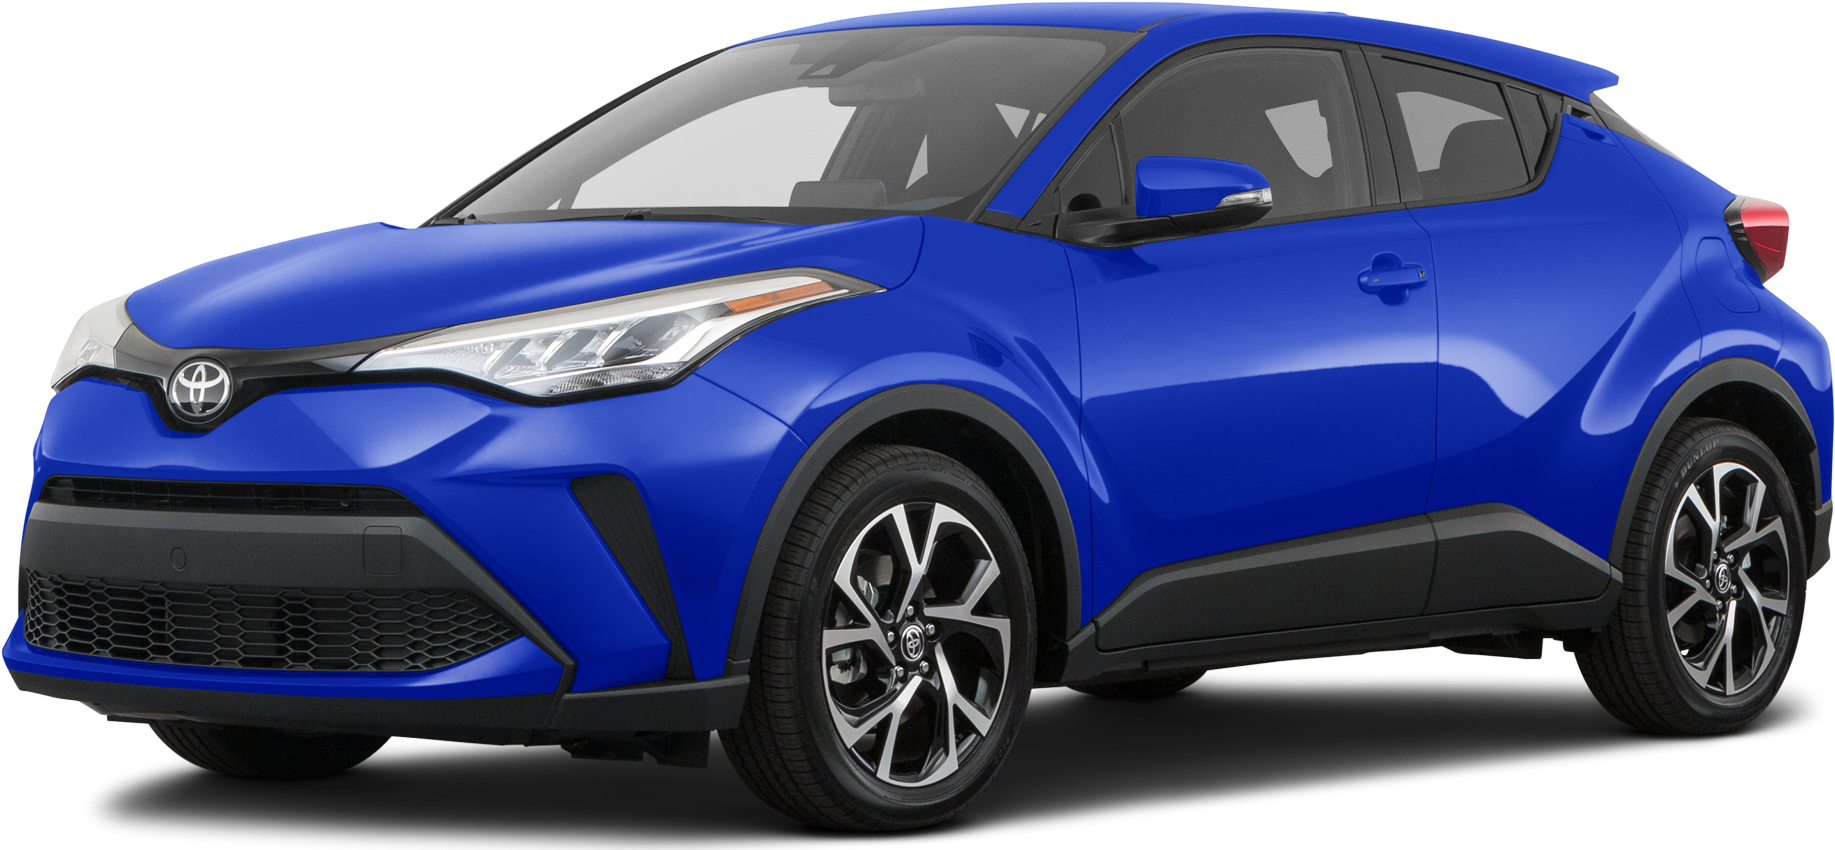 2022 Toyota C-HR Review: Prices, Specs, and Photos - The Car